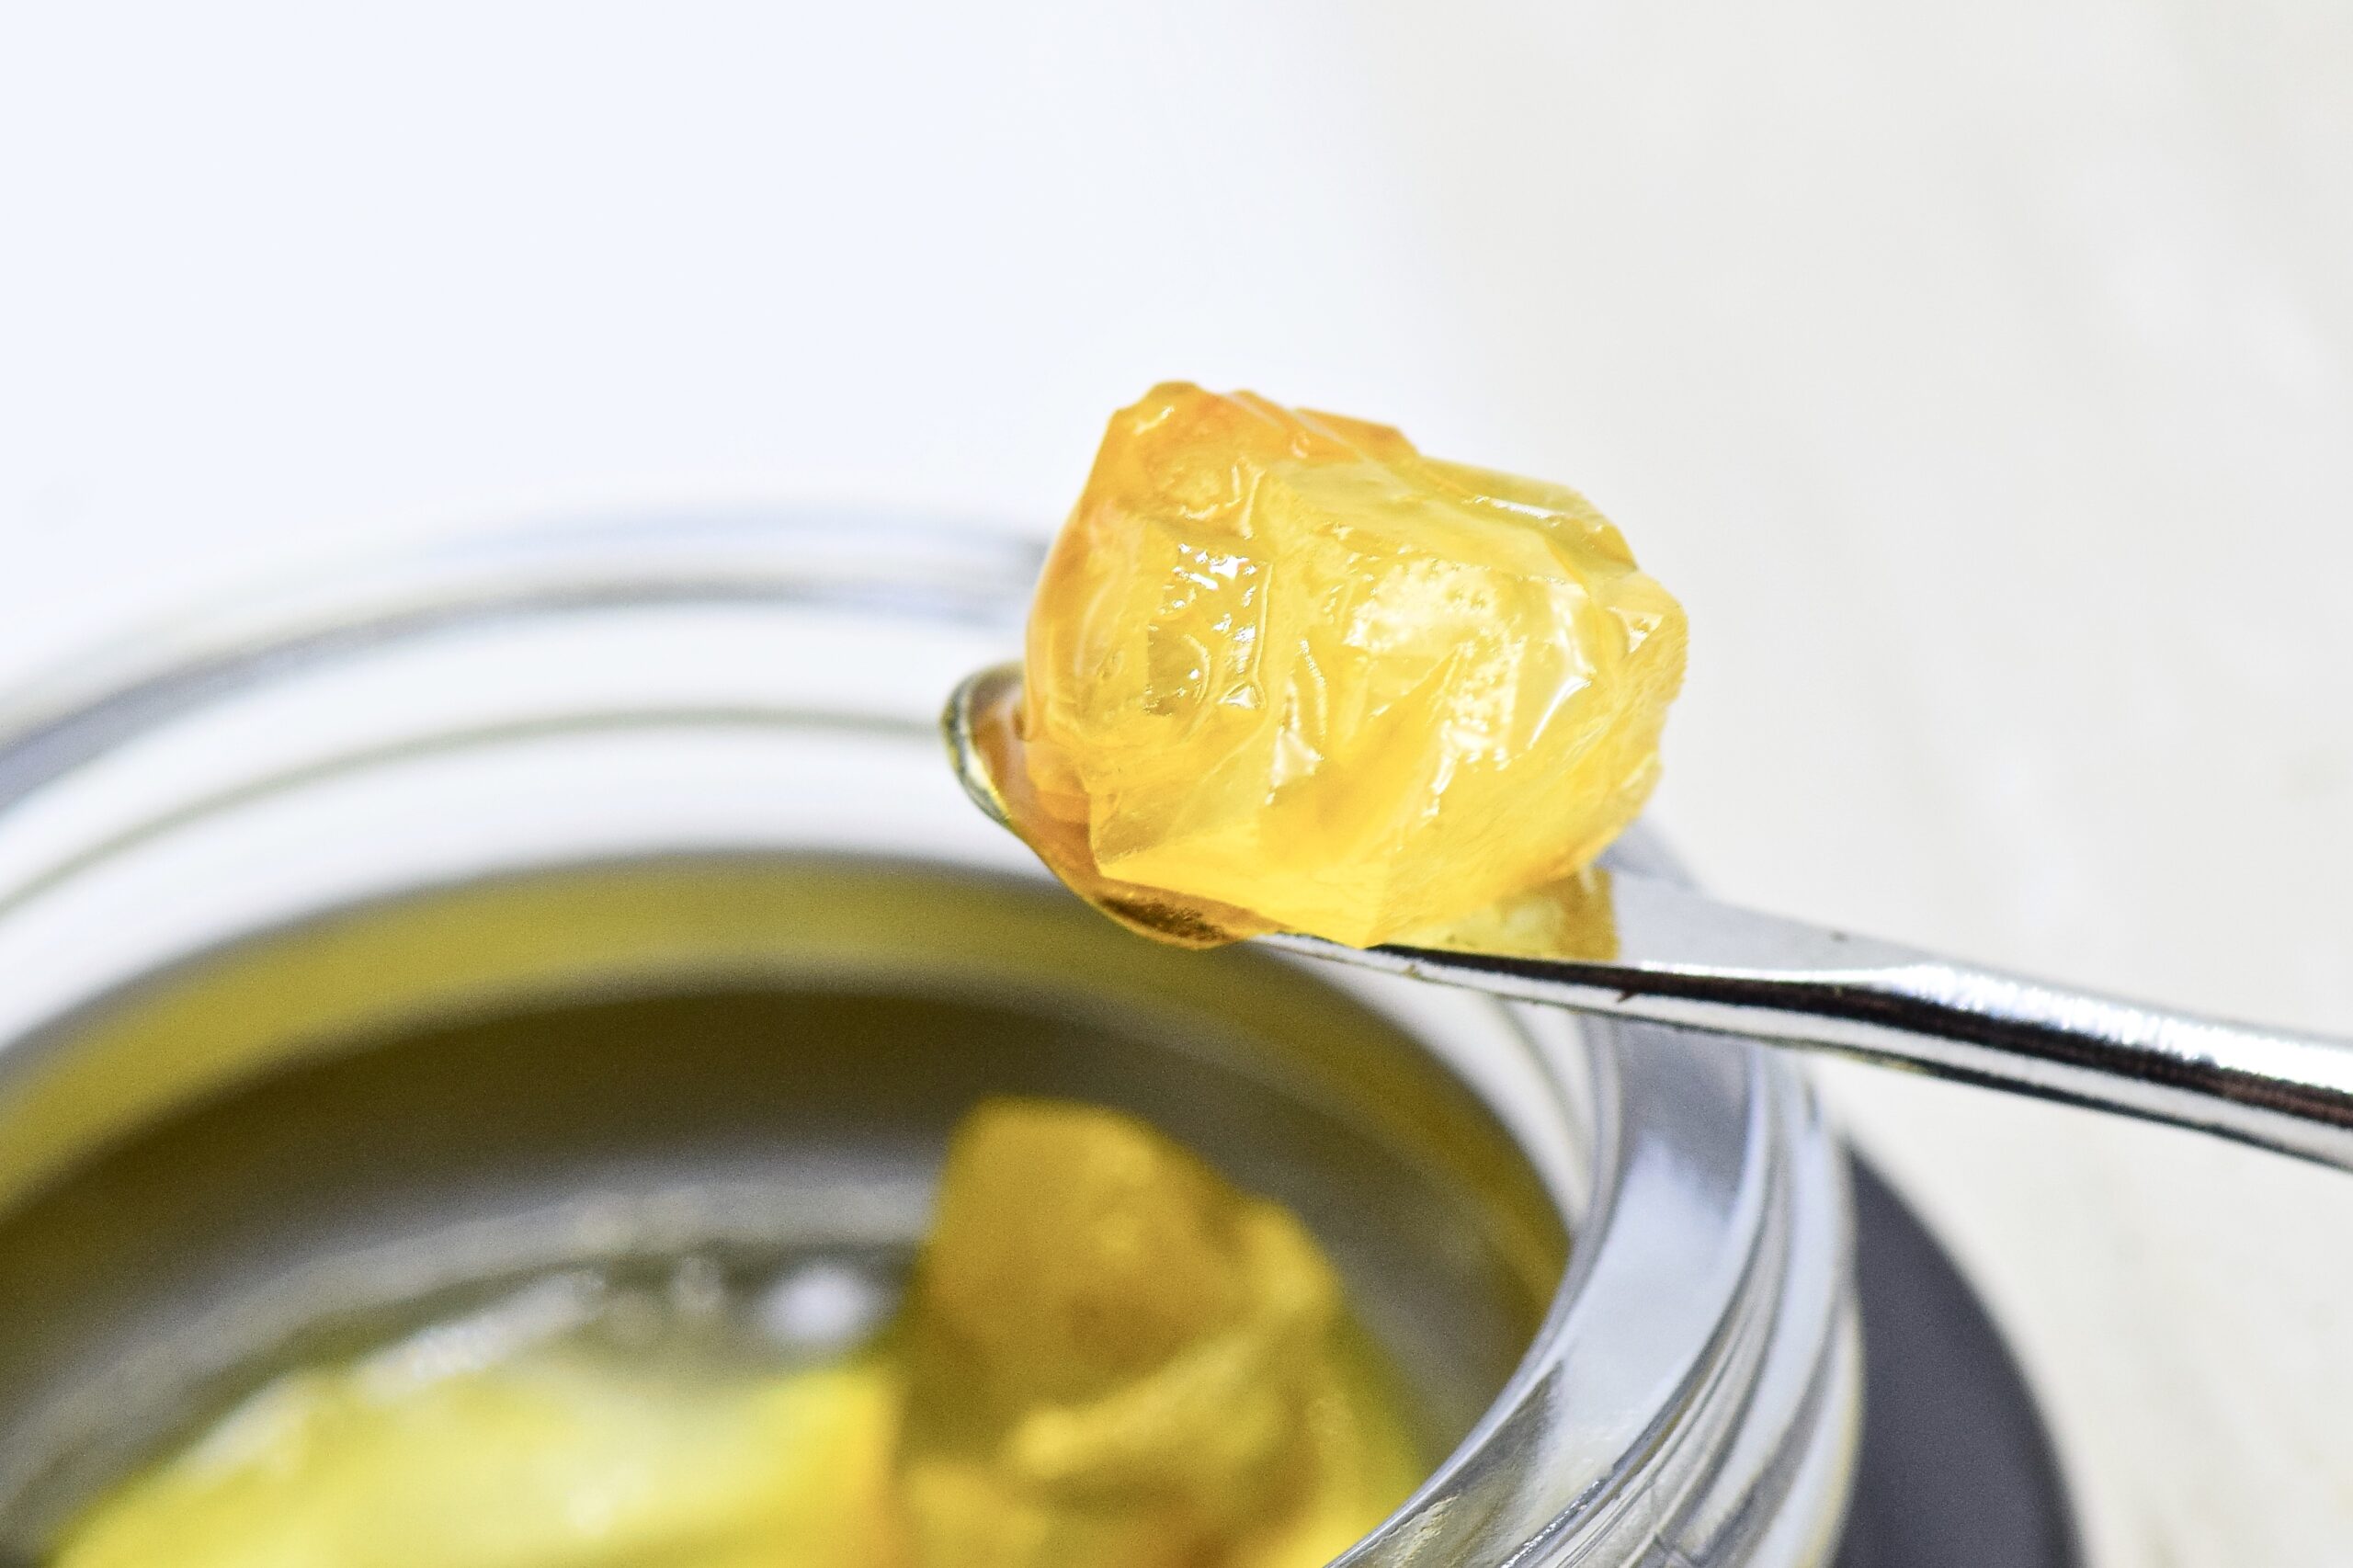 Pure Live Resin Extractions